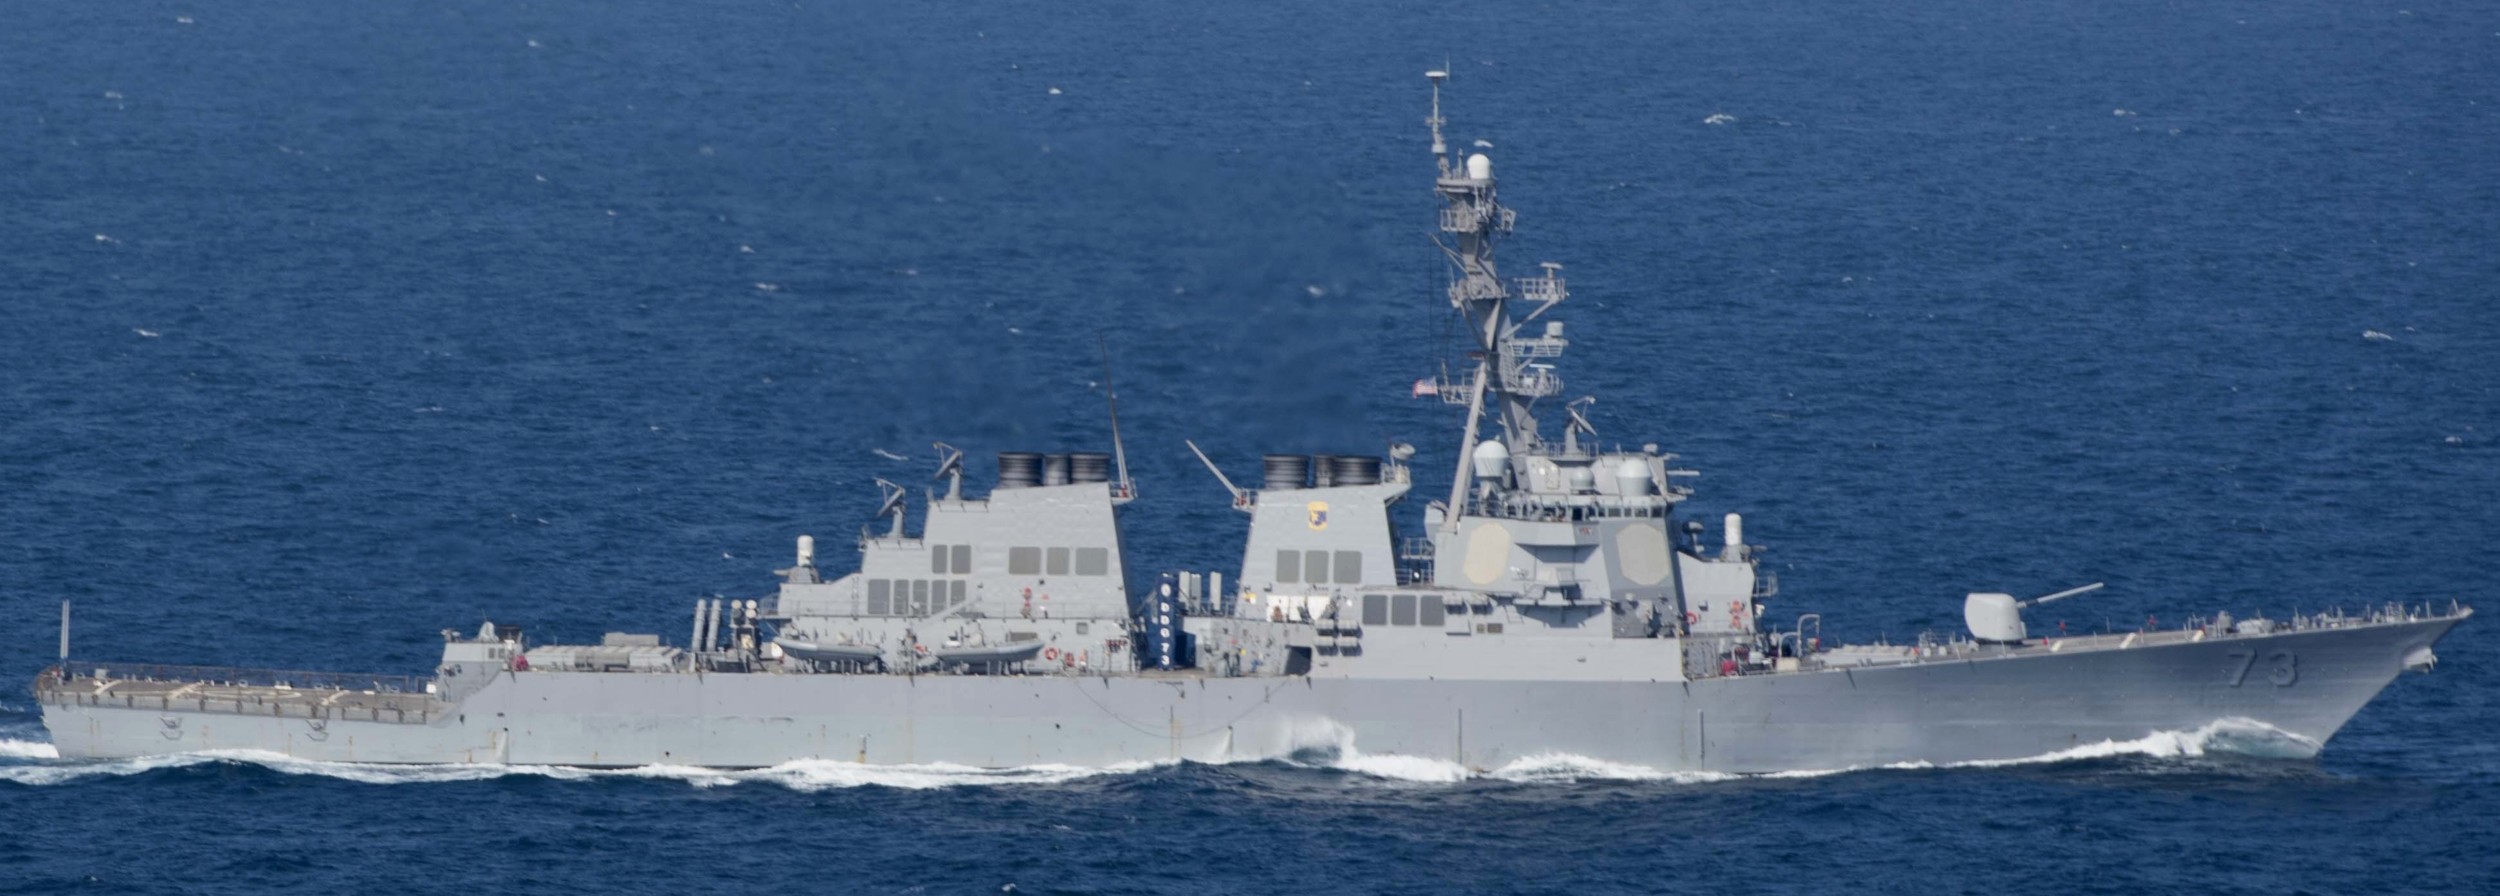 ddg-73 uss decatur guided missile destroyer arleigh burke class aegis bmd 05